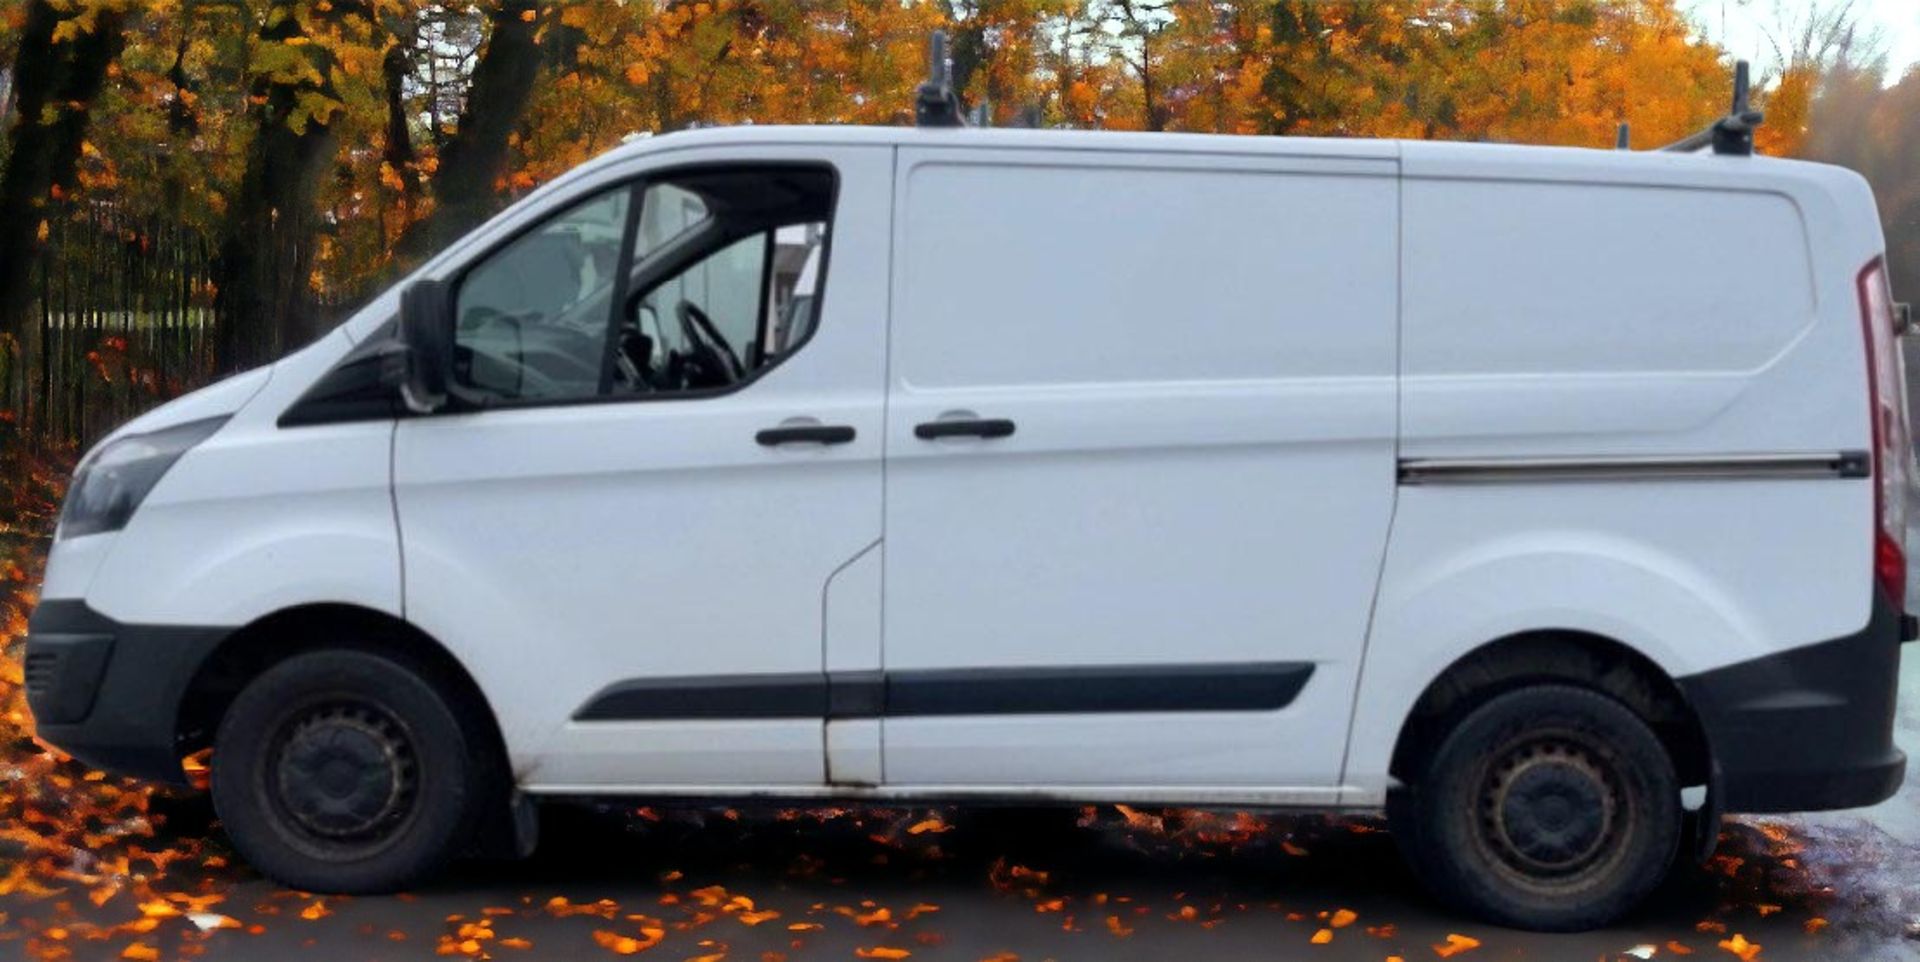 2015 FORD TRANSIT CUSTOM PANEL VAN - RELIABLE AND EFFICIENT WORKHORSE - Image 4 of 17